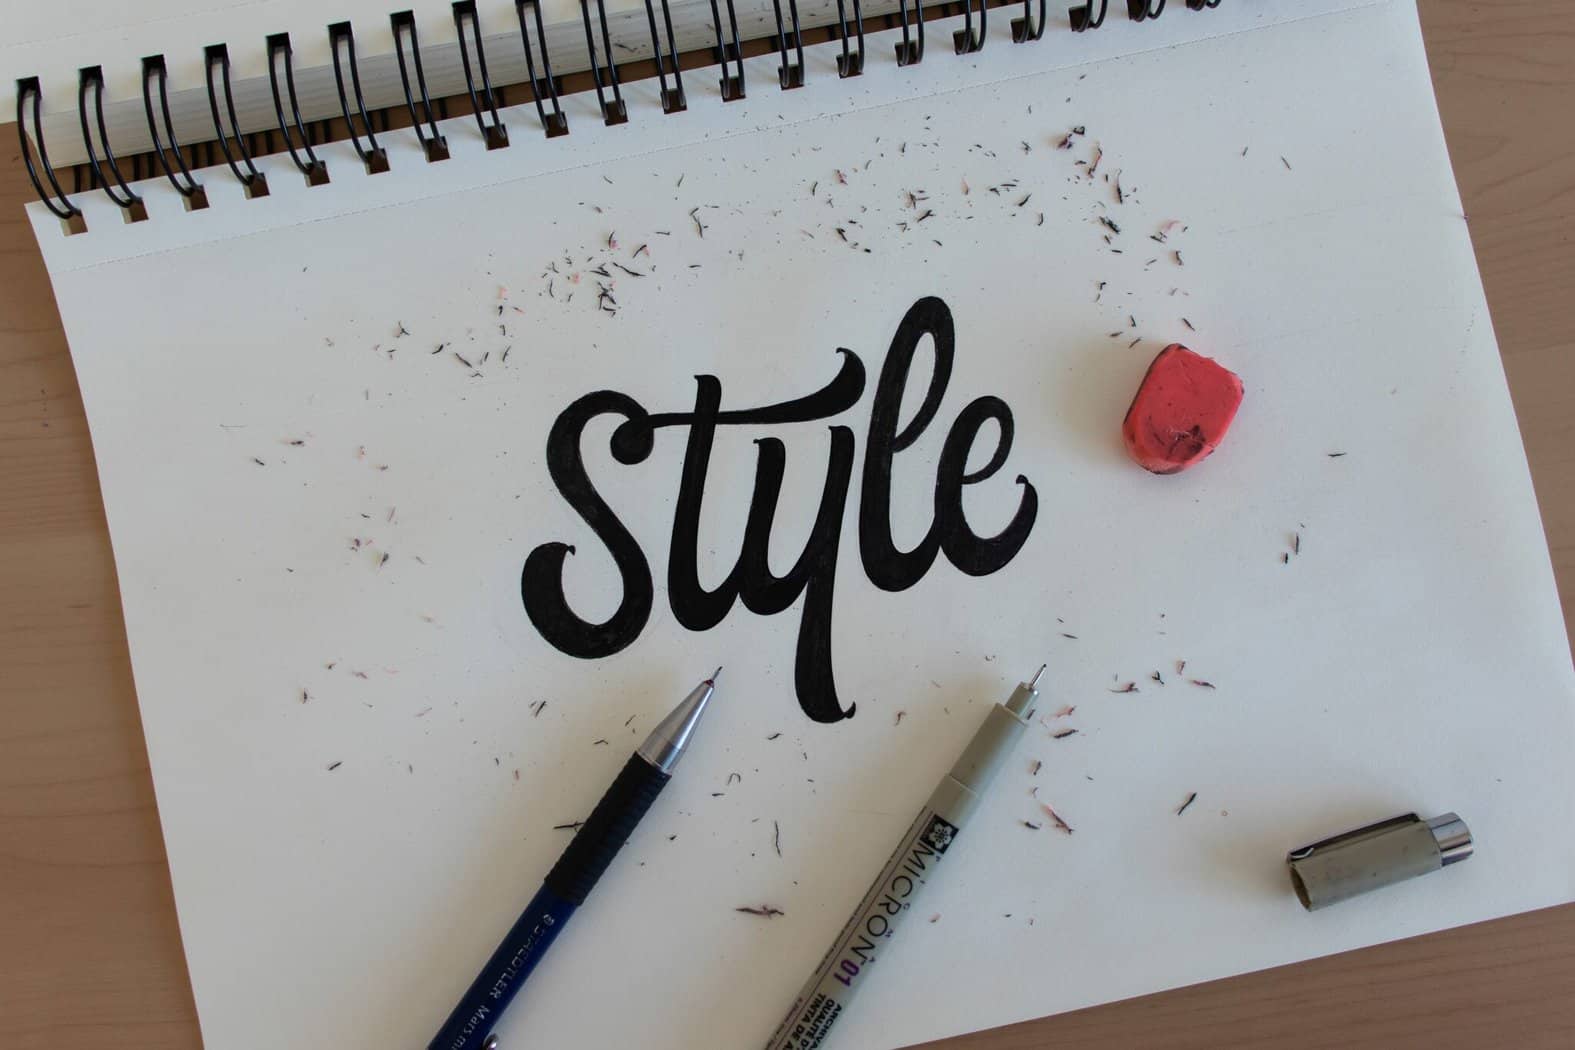 The Ultimate Hand Lettering Guide For Beginners - Lettering Daily